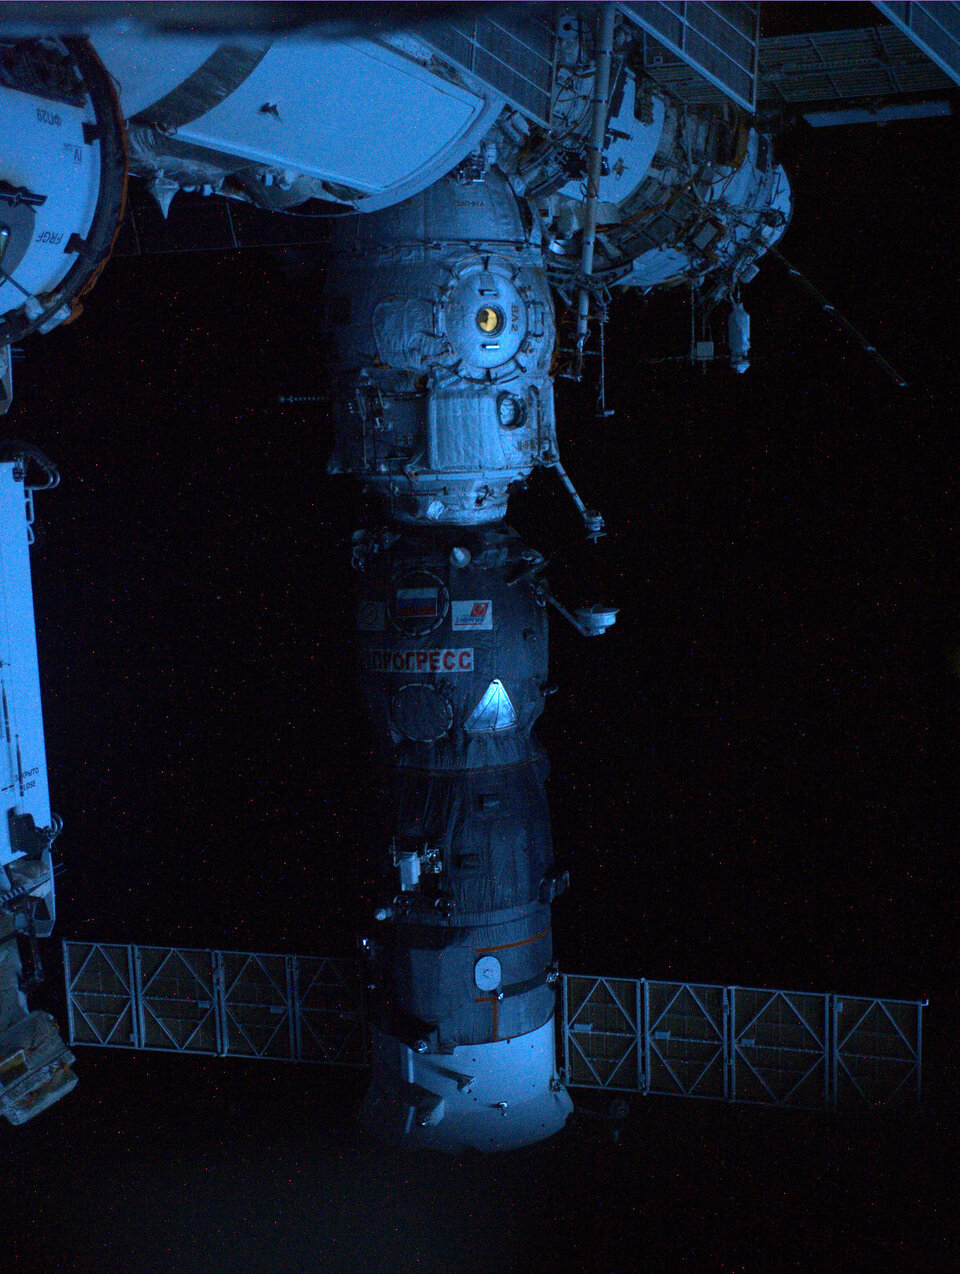 Soyuz spacecraft docked with Space Station